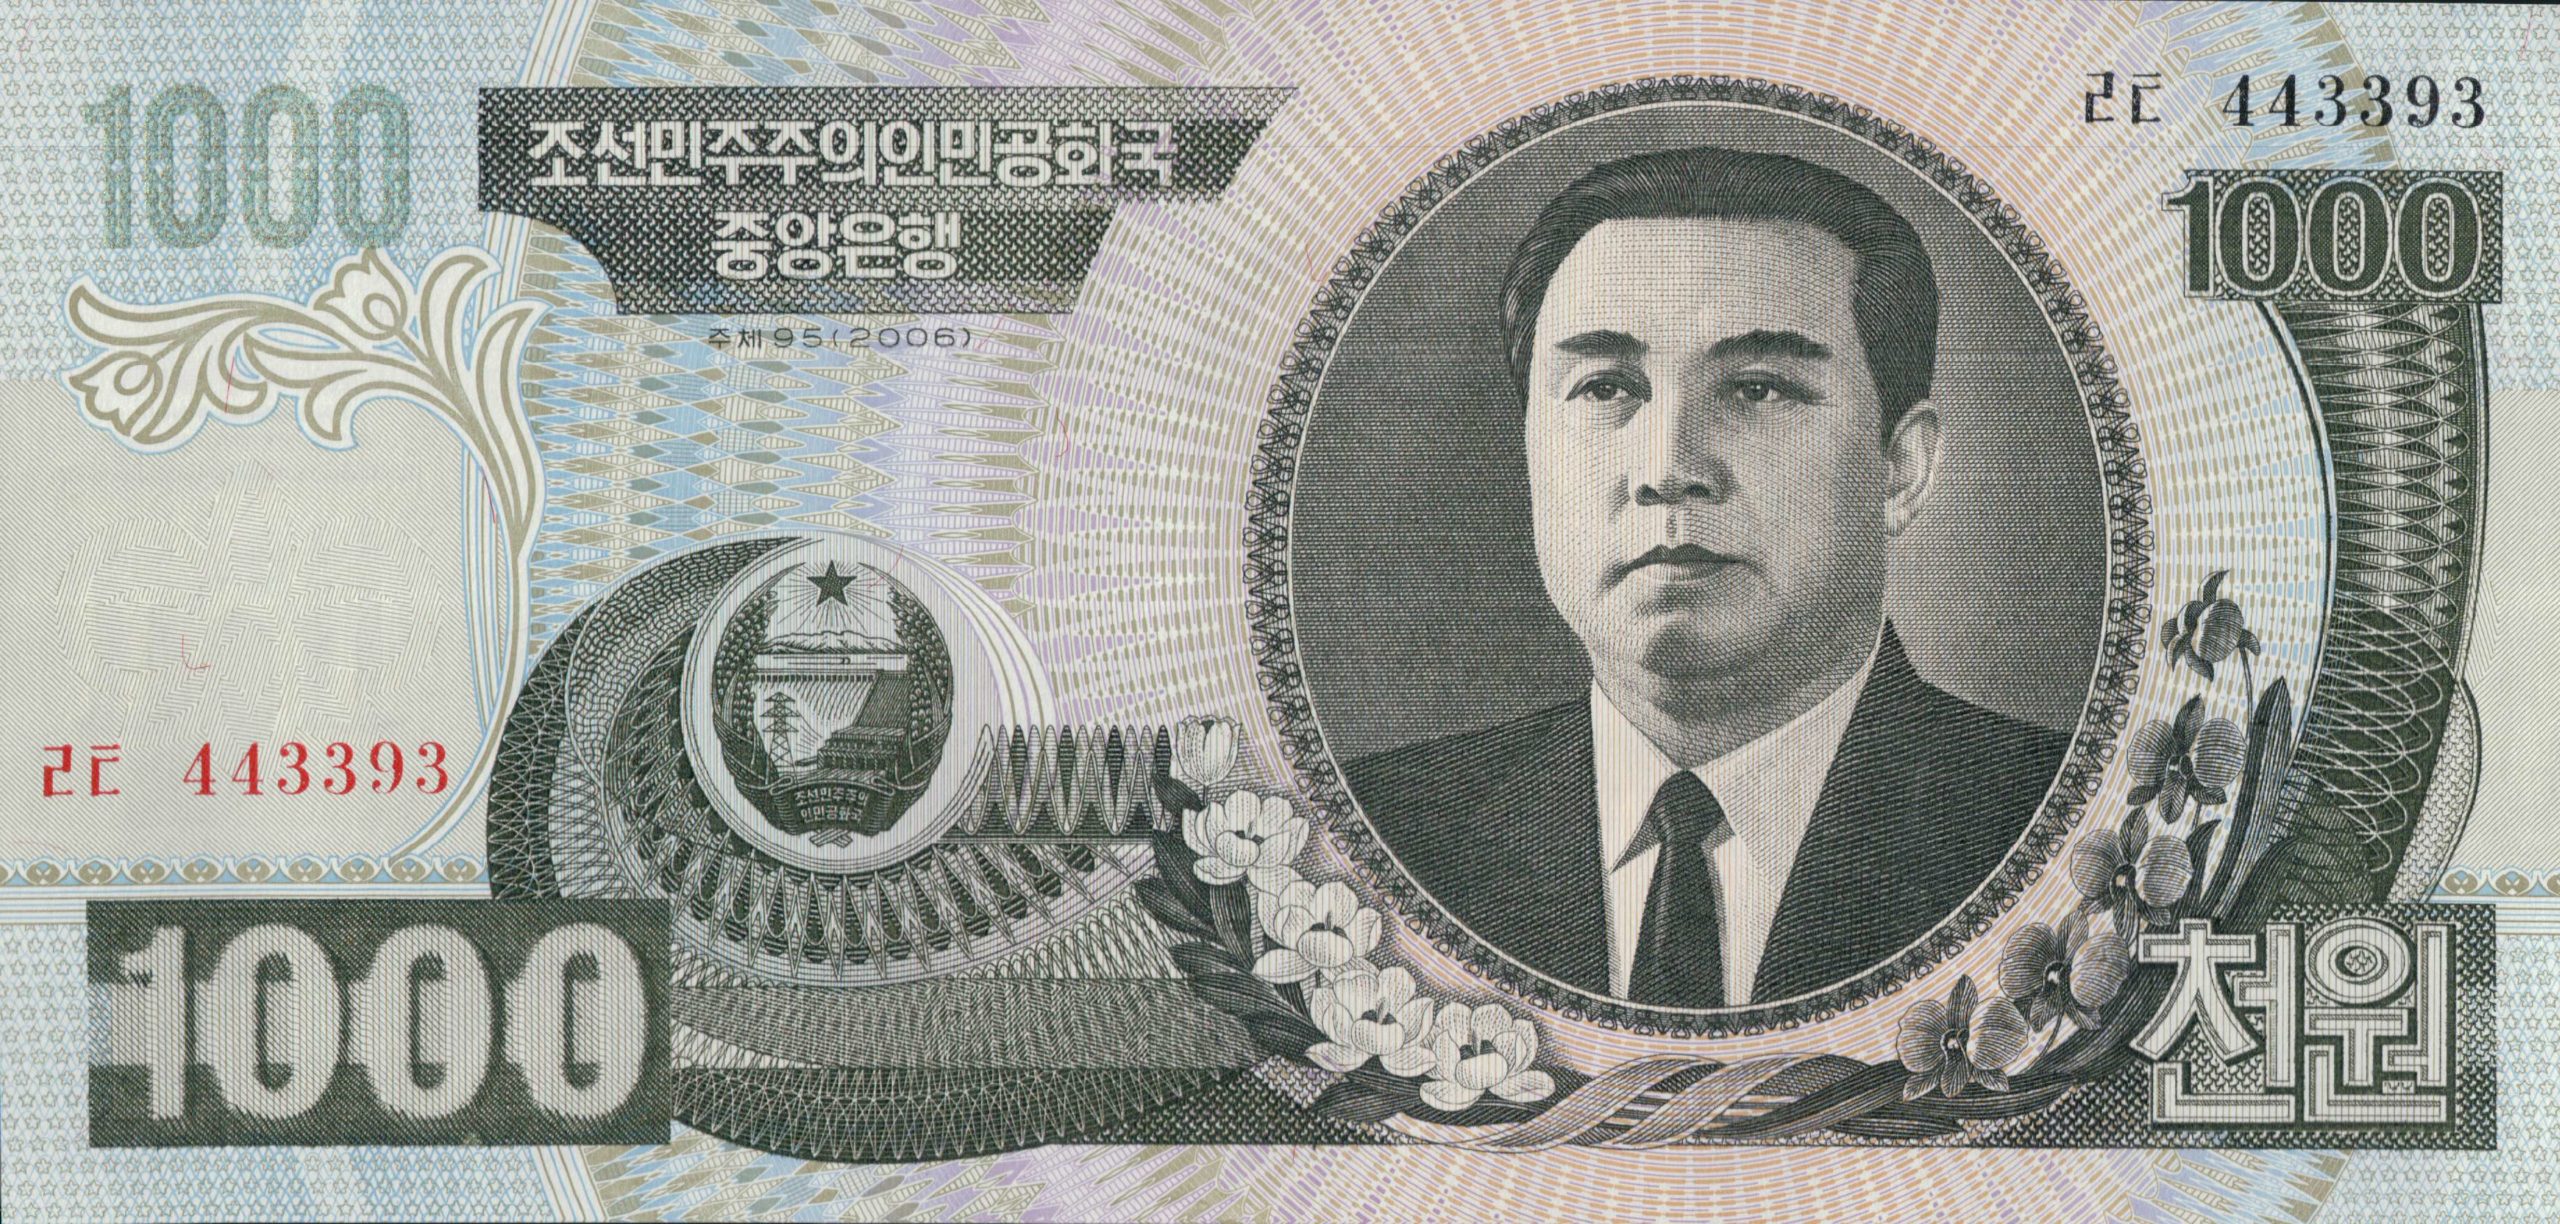 North Korean Currency